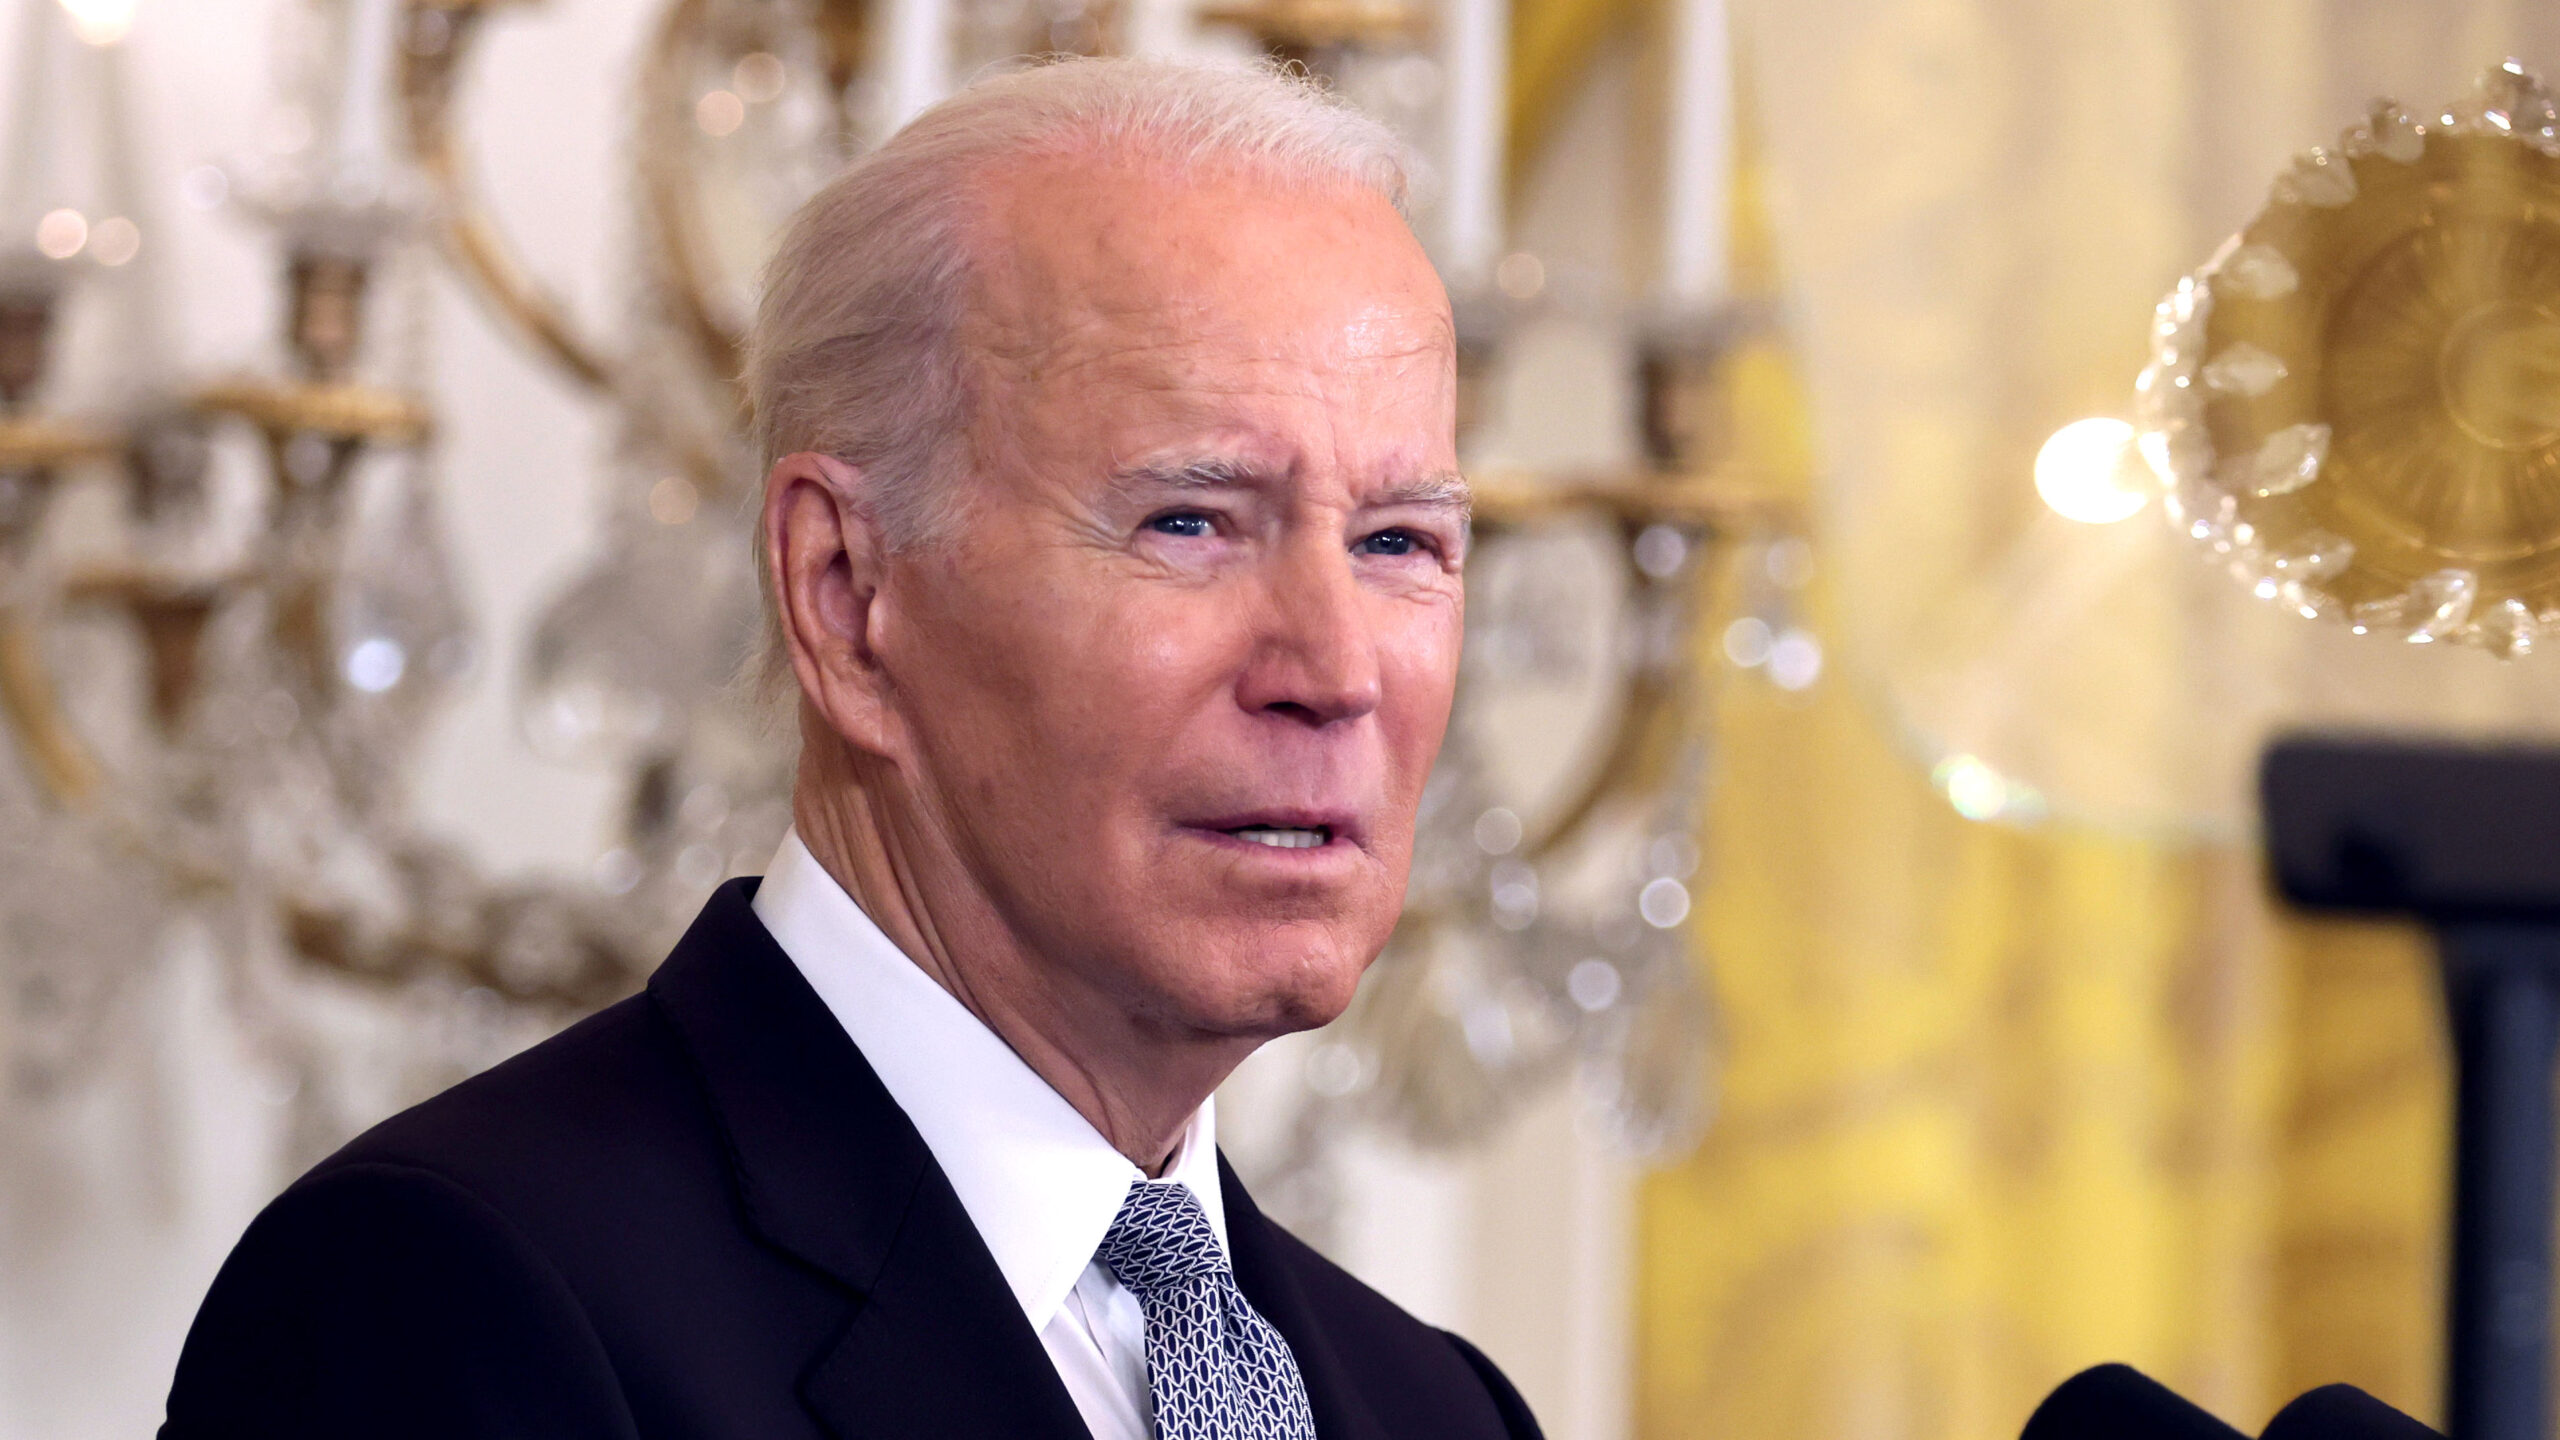 Biden Releases Statement About Declassifying Intelligence On Origins Of COVID-19 Pandemic